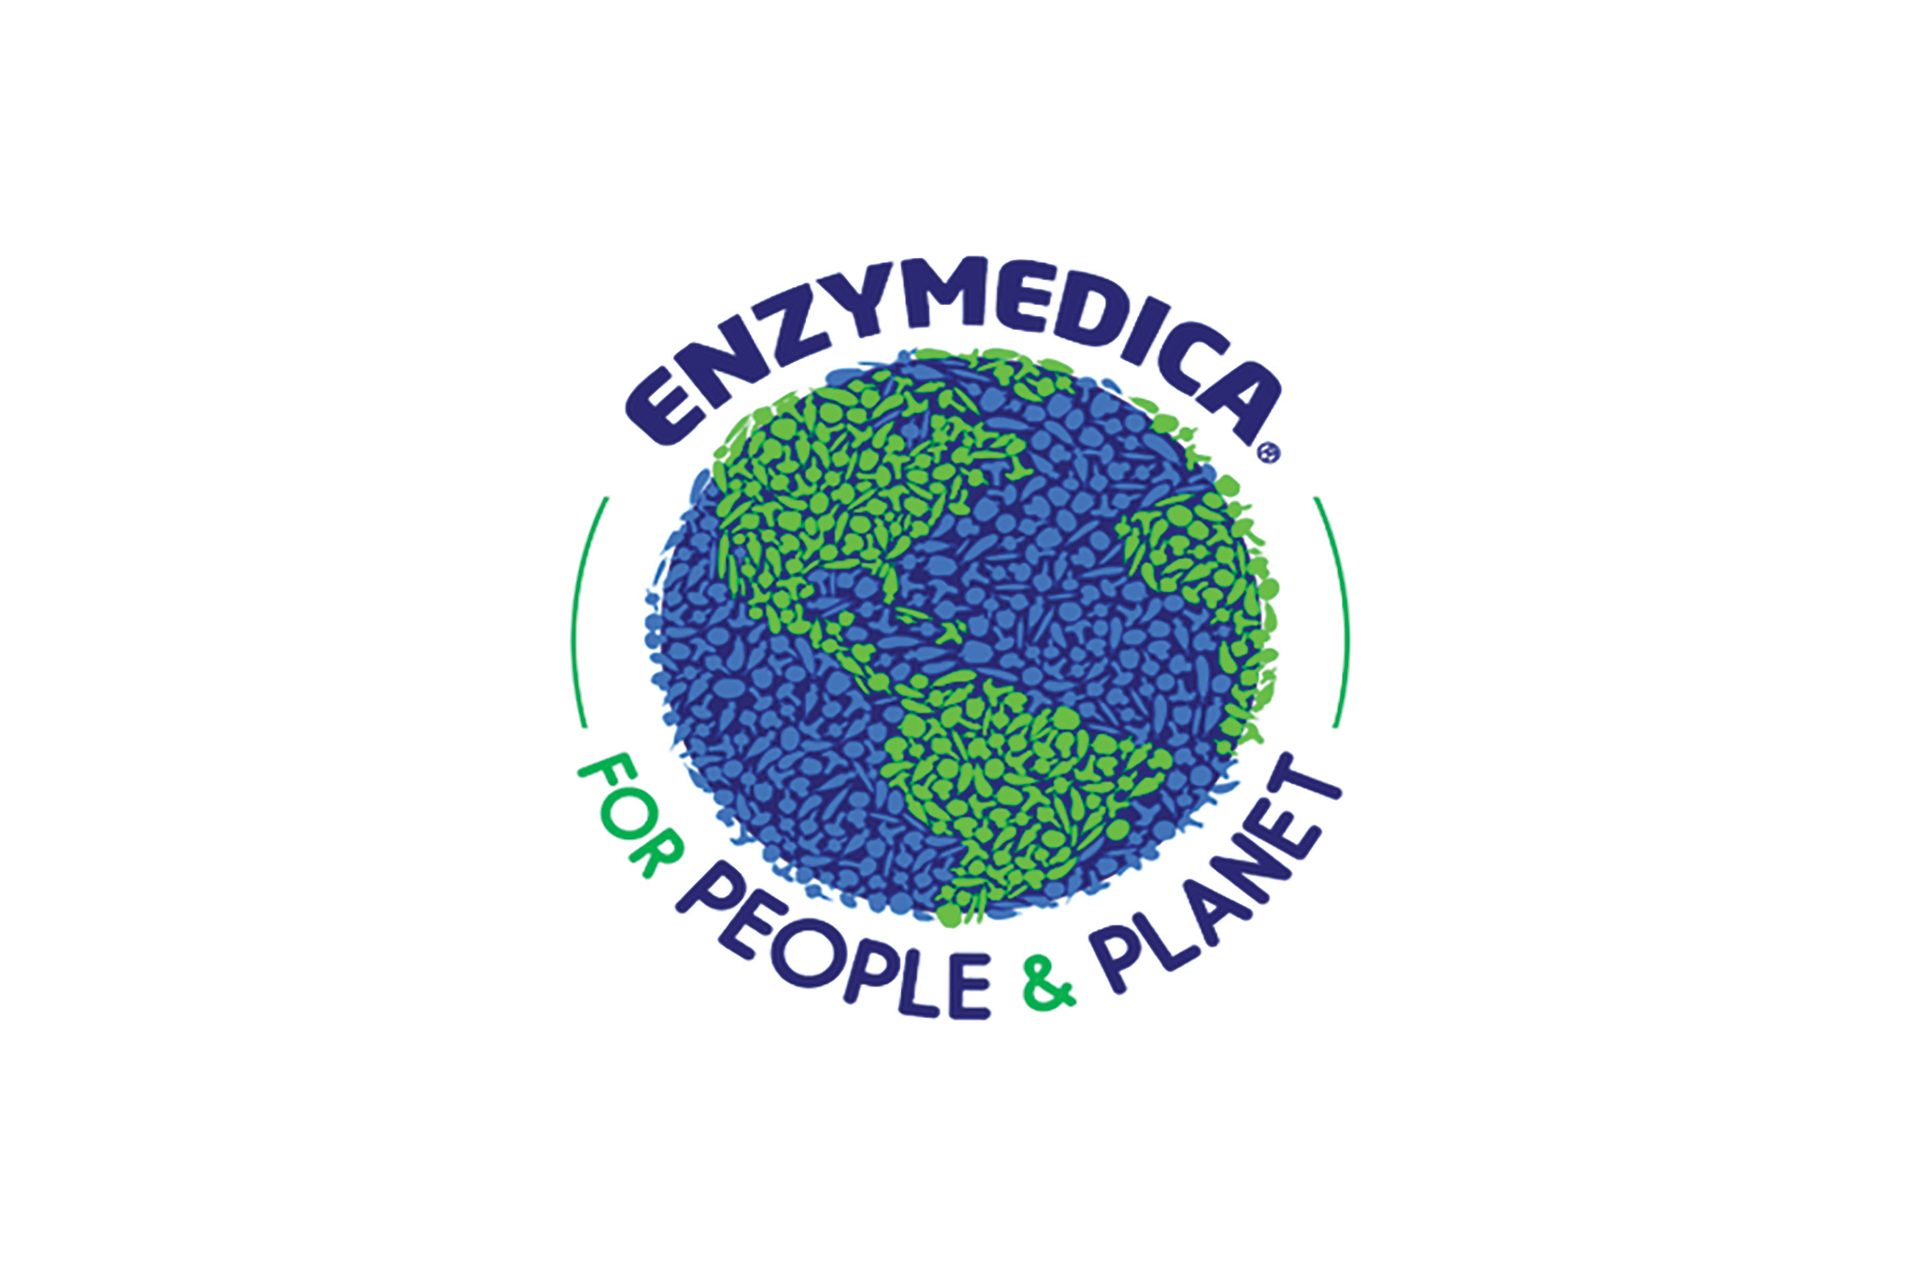 Enzymedica planet logo blue and green